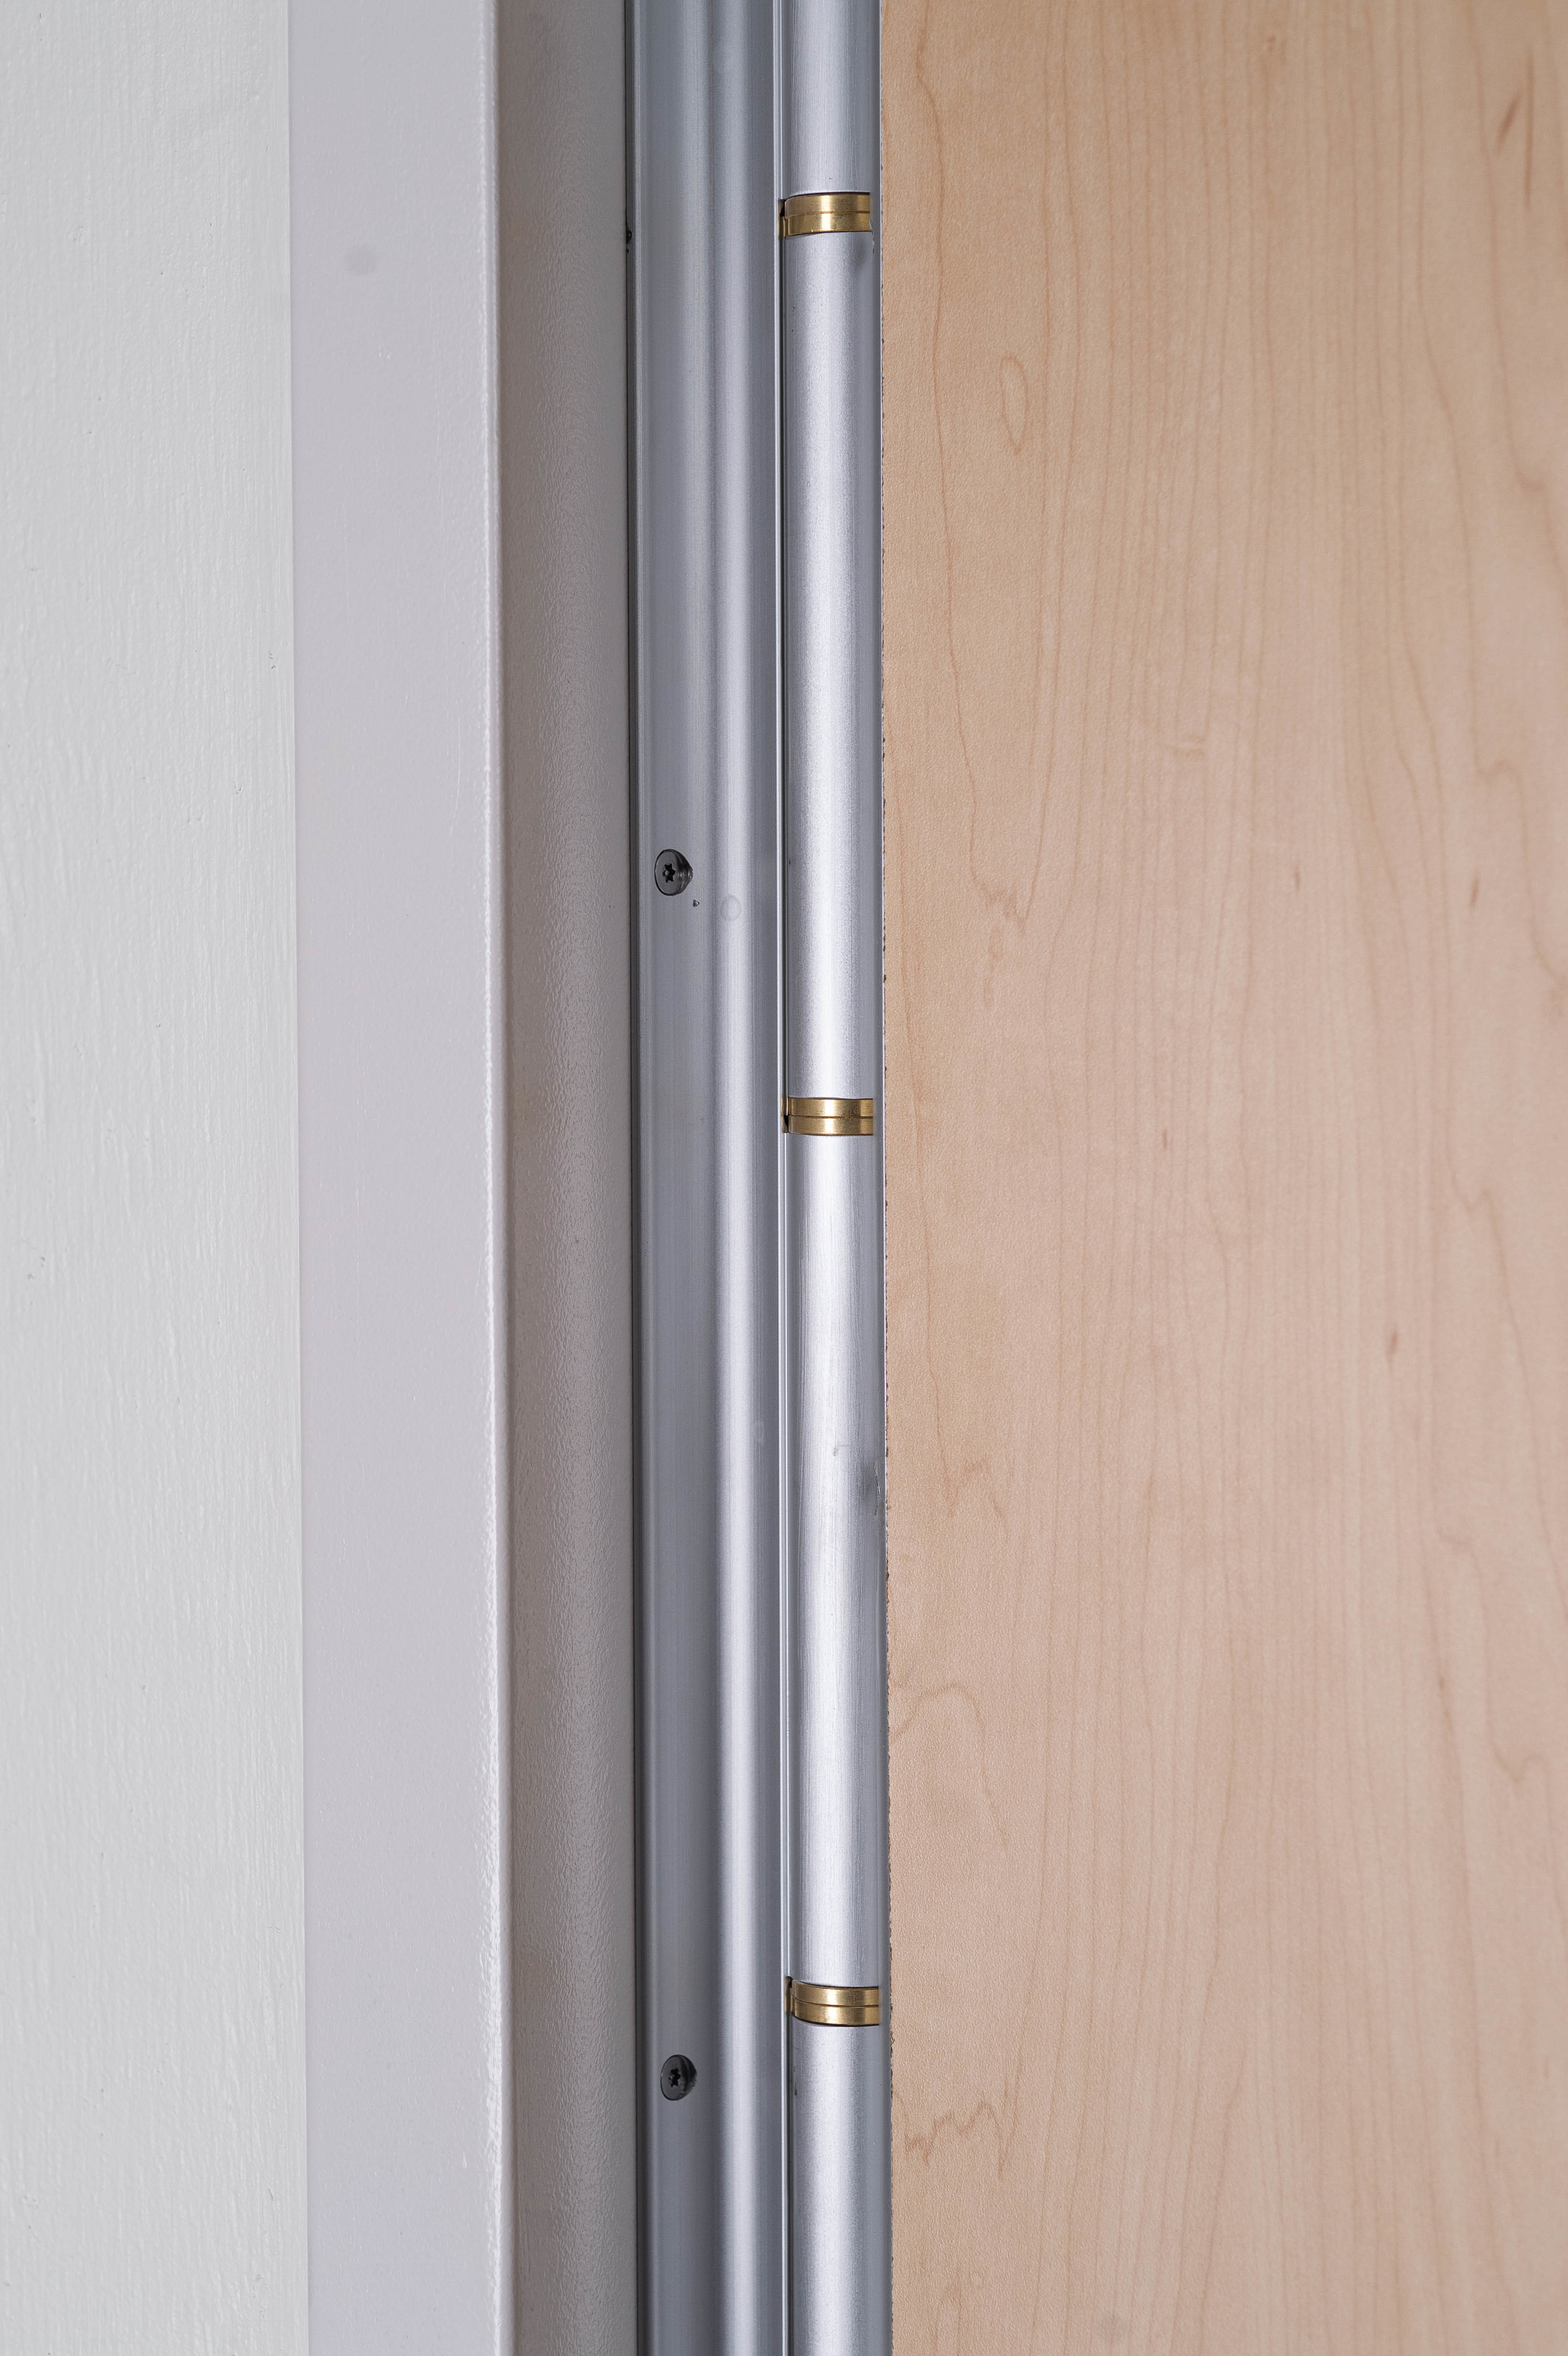 Anti-Barricade Hinge from the SWING Door System by Kingsway Group USA.